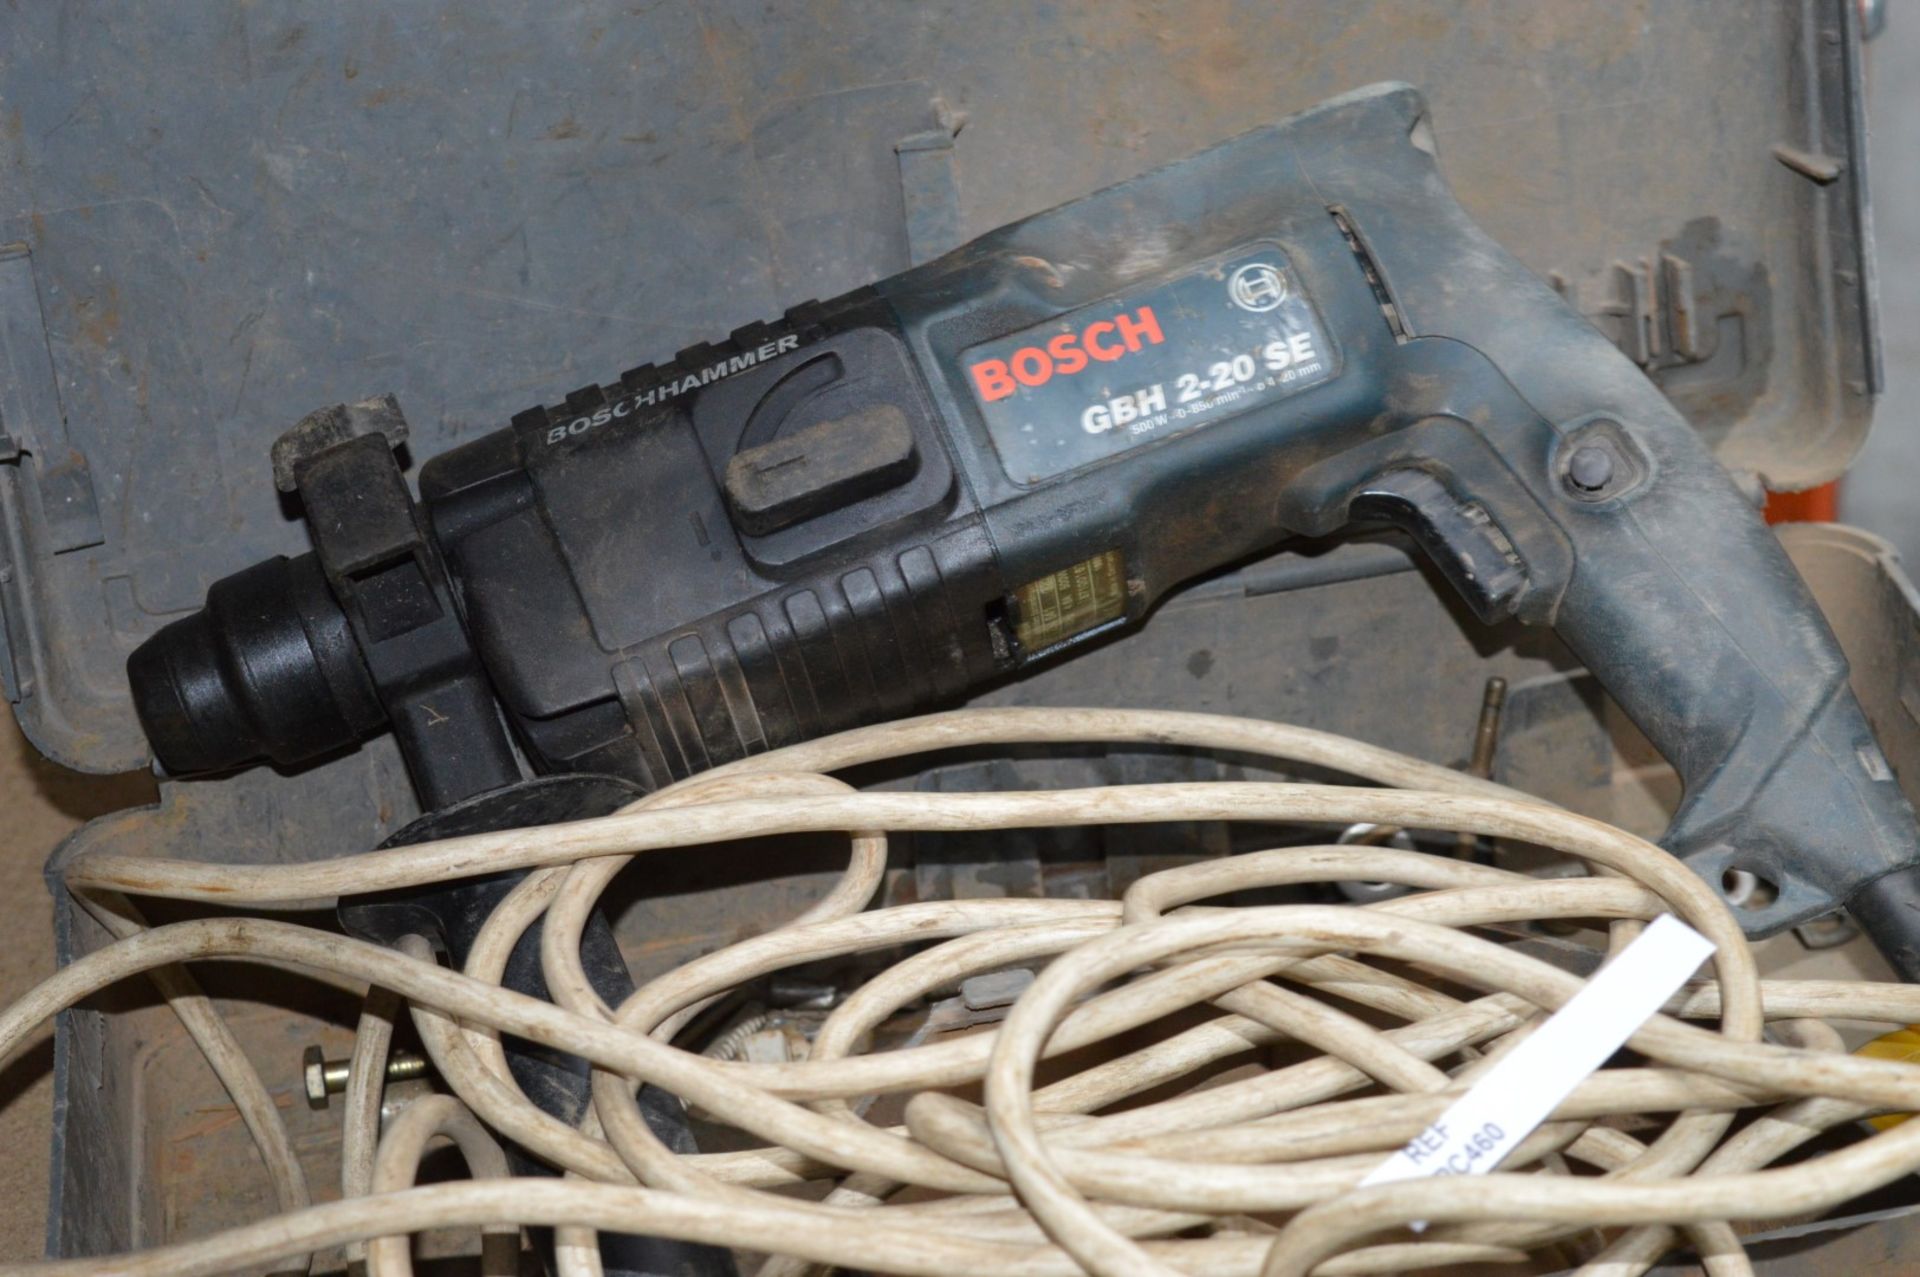 1 x Bosch Rotary Hammer Drill - 110v - Model GBH2-20SE - Includes Protective Case - Tested and Works - Image 4 of 4